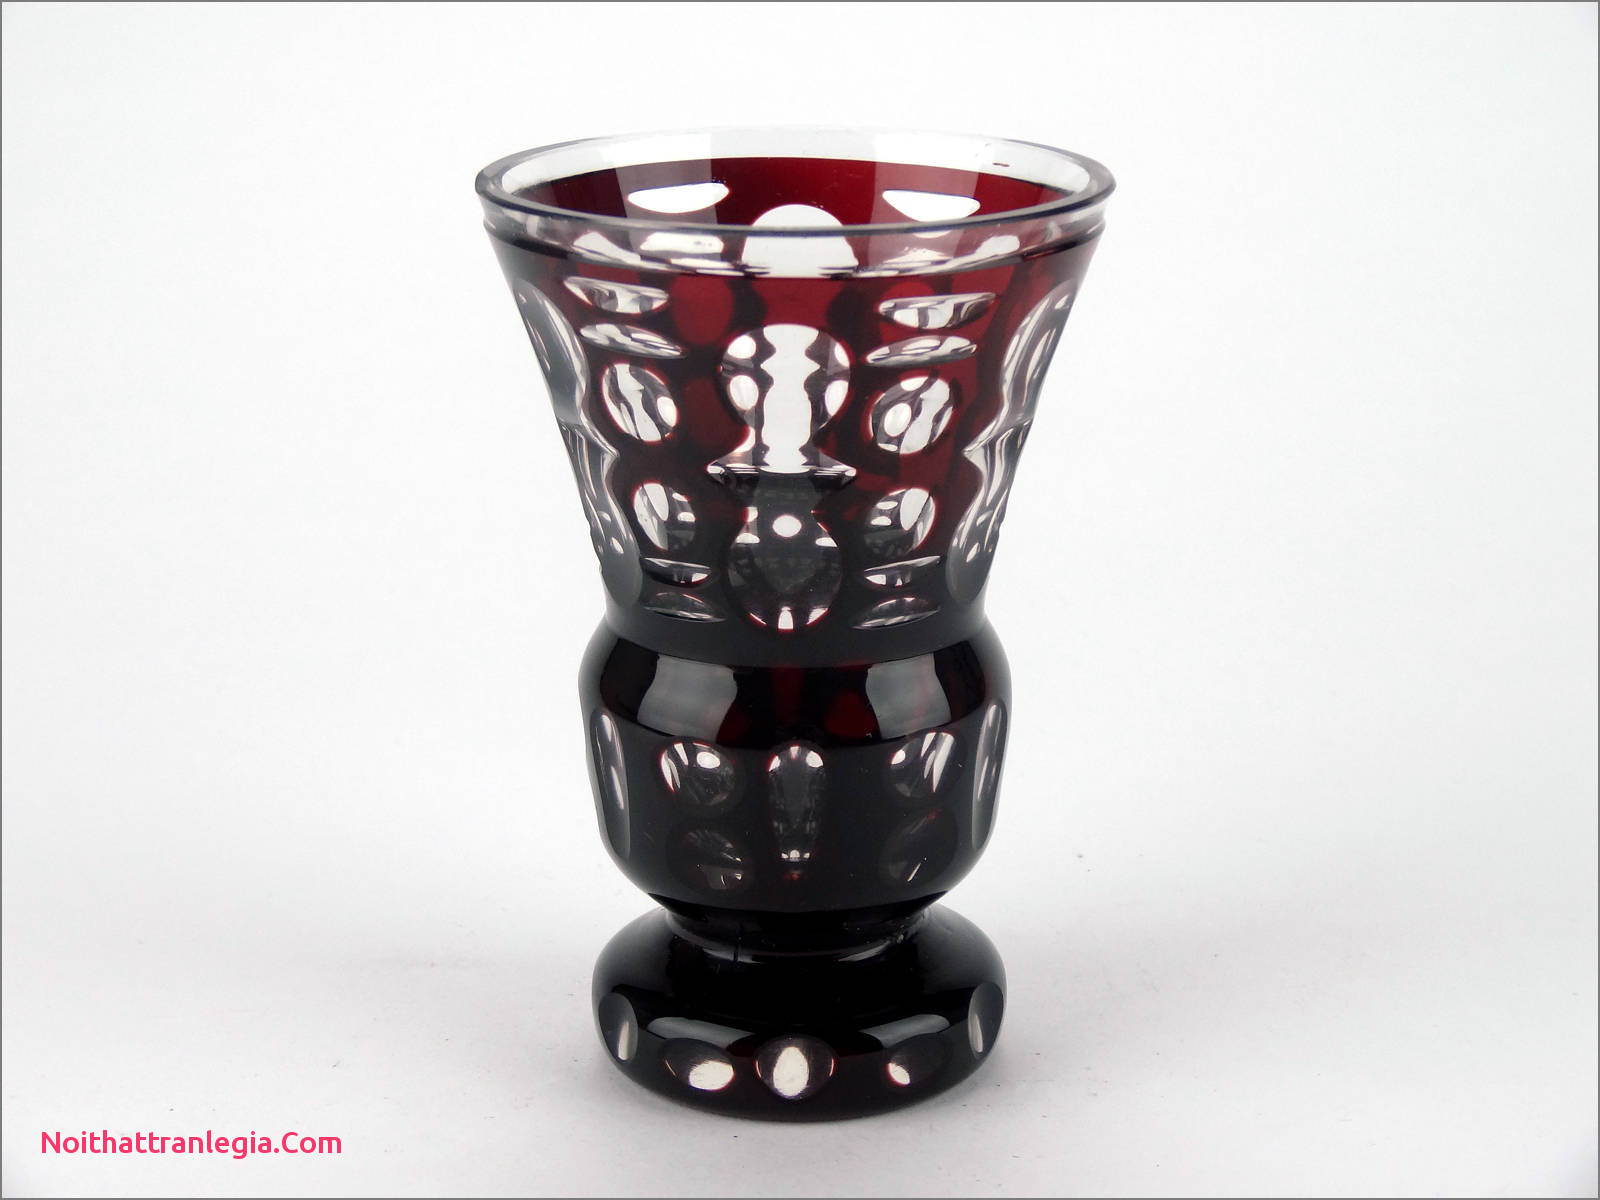 19 Fantastic Small Crystal Vase 2022 free download small crystal vase of 20 cut glass antique vase noithattranlegia vases design in antique c1910 bohemian cut to clear red glass vase czech ruby red cut glass goblet